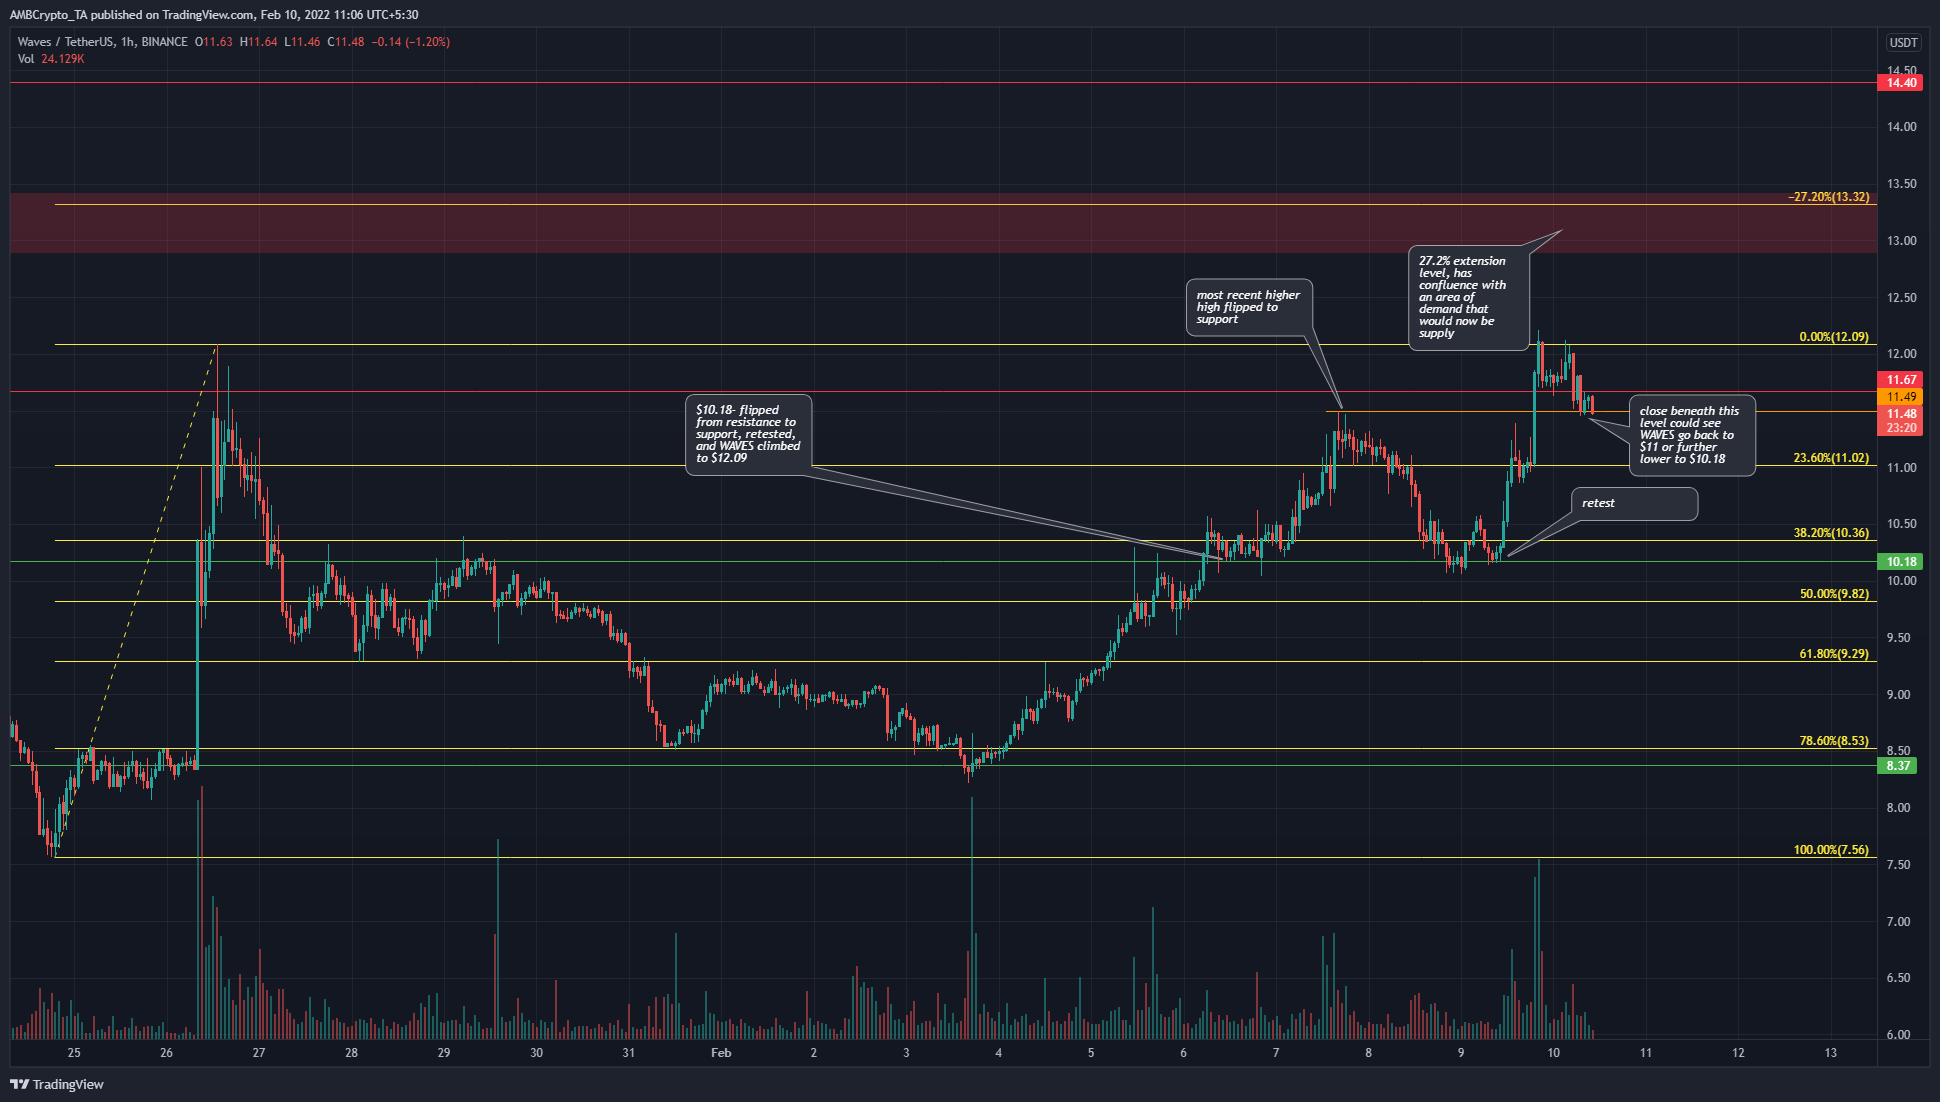 Waves at a short-term crossroads, watch these levels in the next couple of days